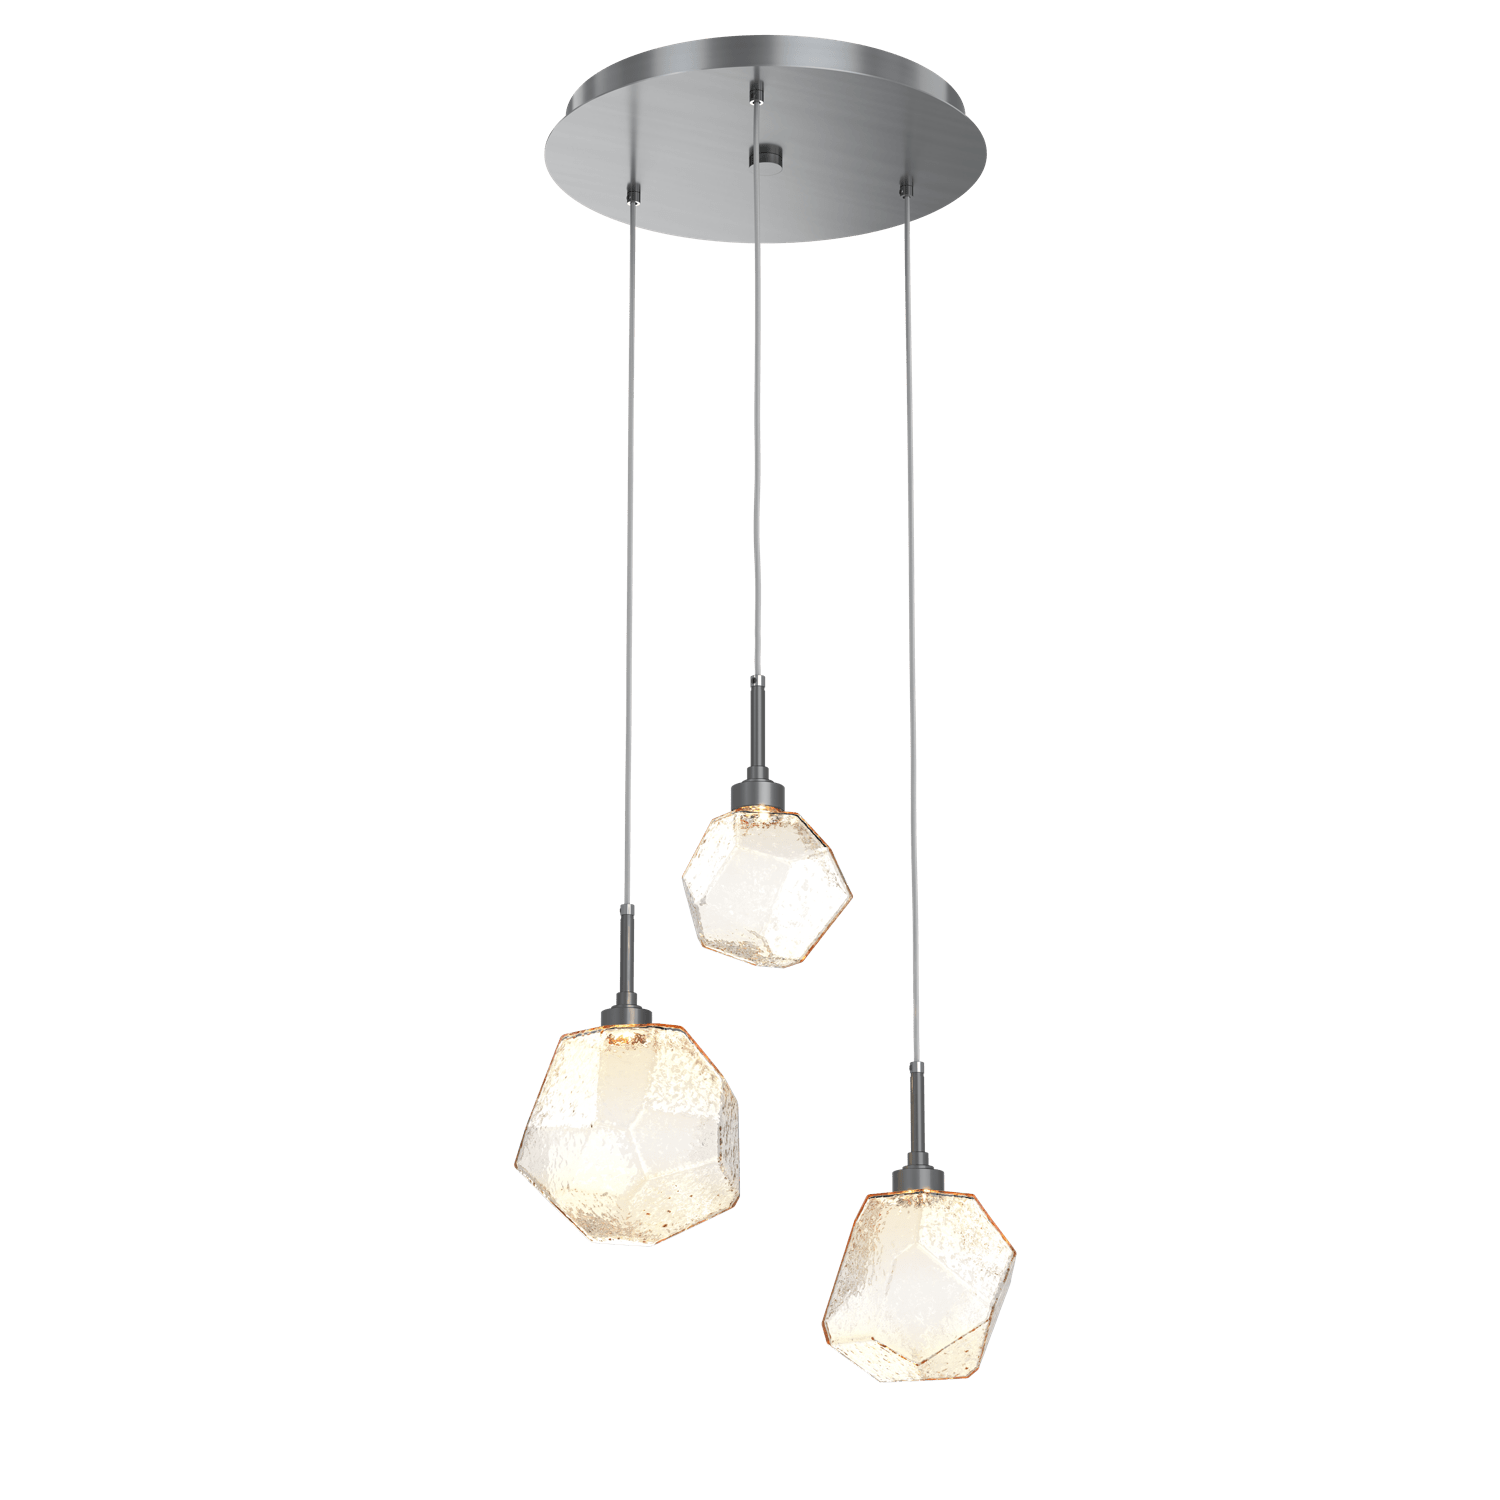 CHB0039-03-GM-A-Hammerton-Studio-Gem-3-light-round-pendant-chandelier-with-gunmetal-finish-and-amber-blown-glass-shades-and-LED-lamping